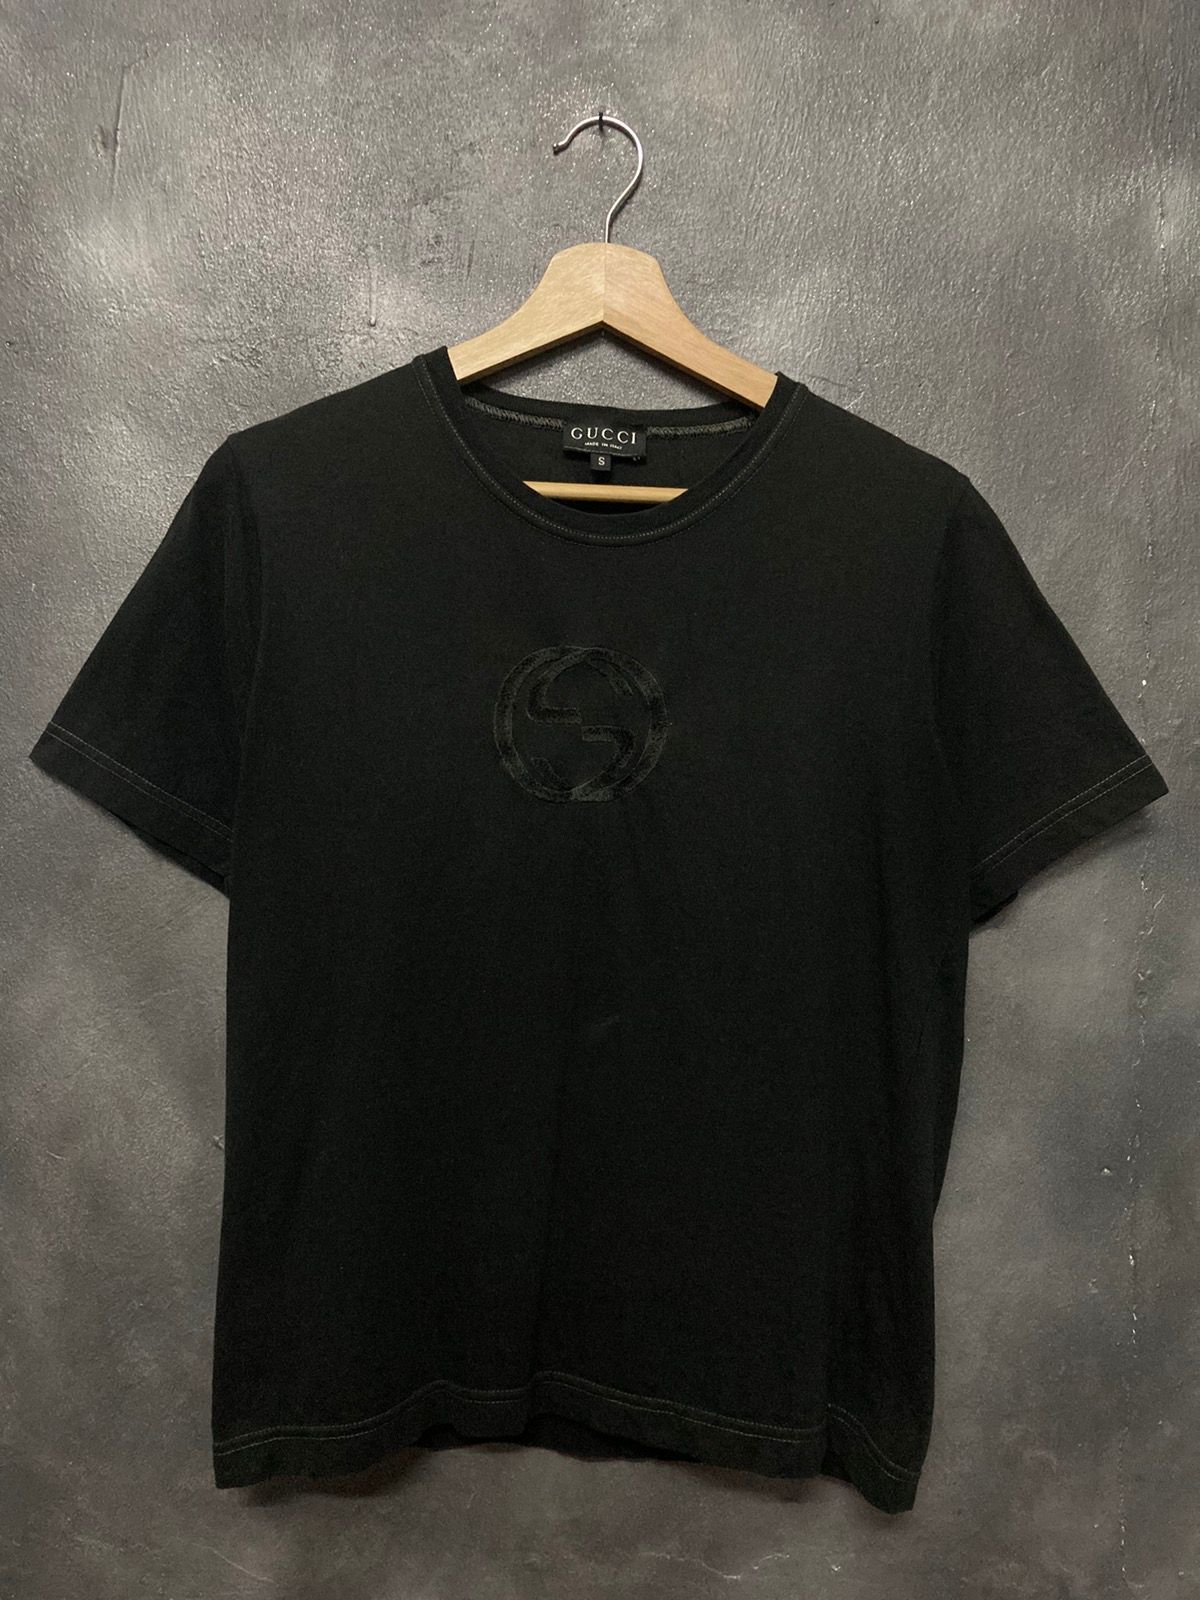 Gucci Embroidery Big Logo Shirt Made in Italy - 1